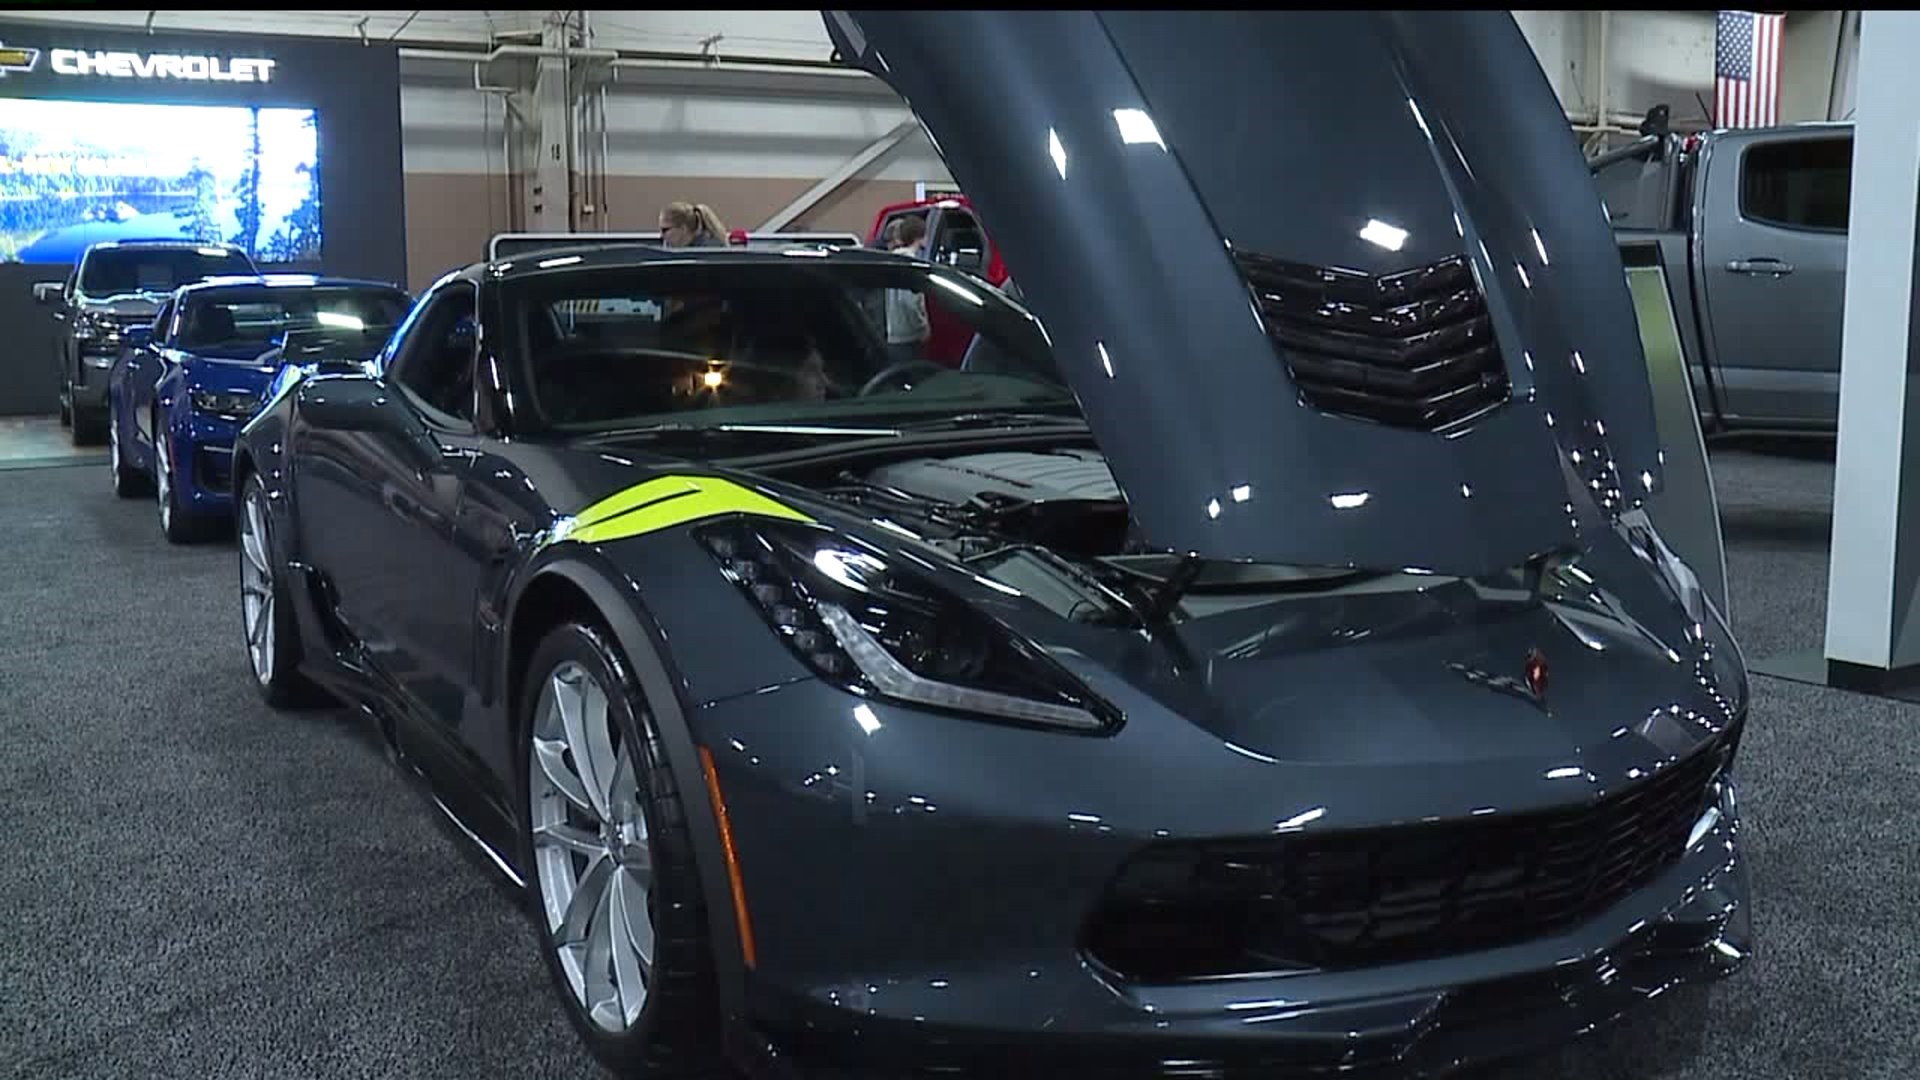 The PA Auto Show returns to Harrisburg this weekend